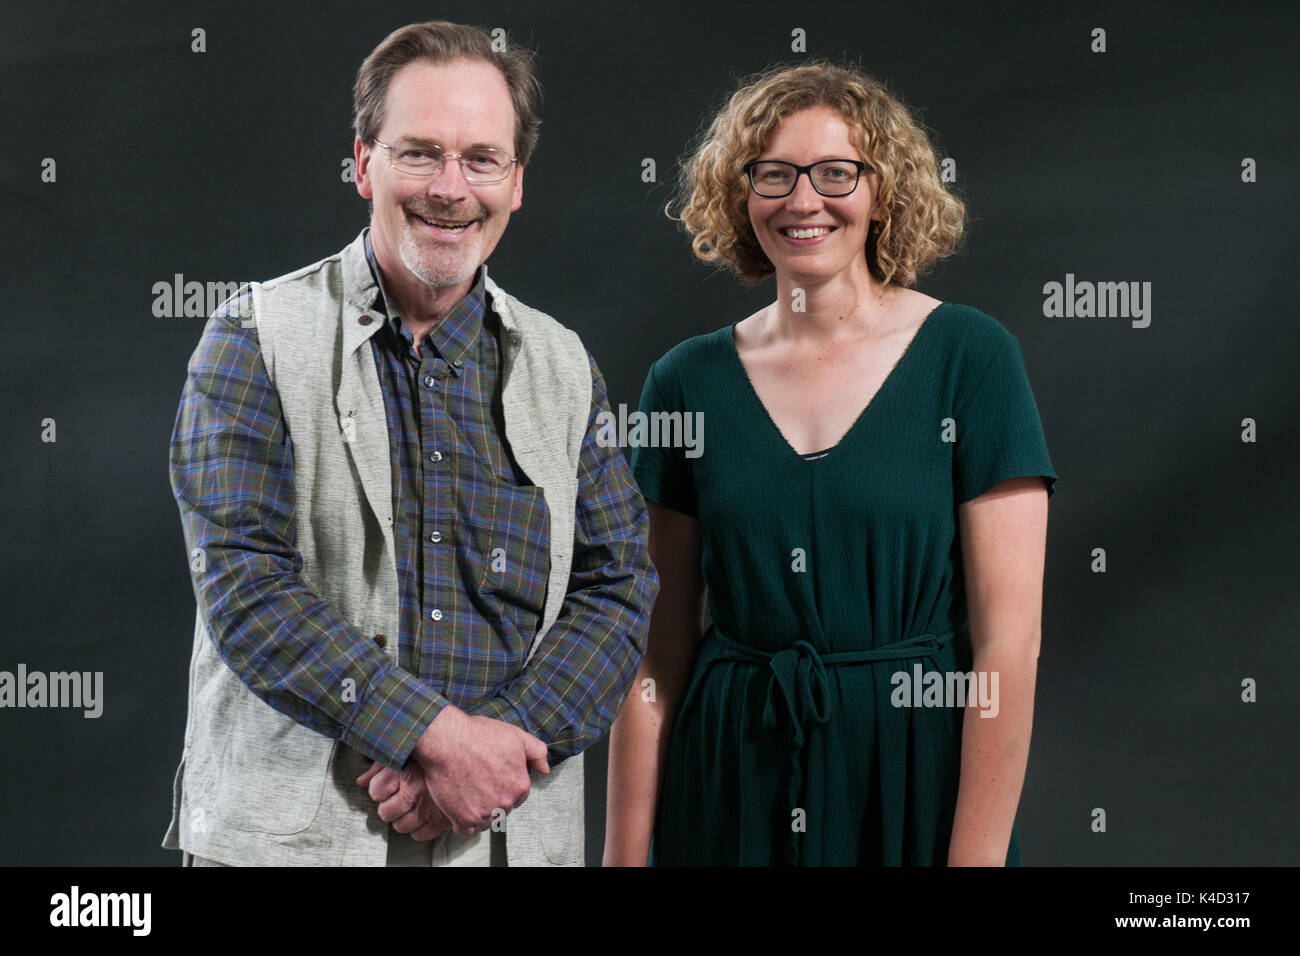 Donald Smith and Beth Underdown attend a photocall during the Edinburgh International Book Festival on August 12, 2017 in Edinburgh, Scotland. Stock Photo